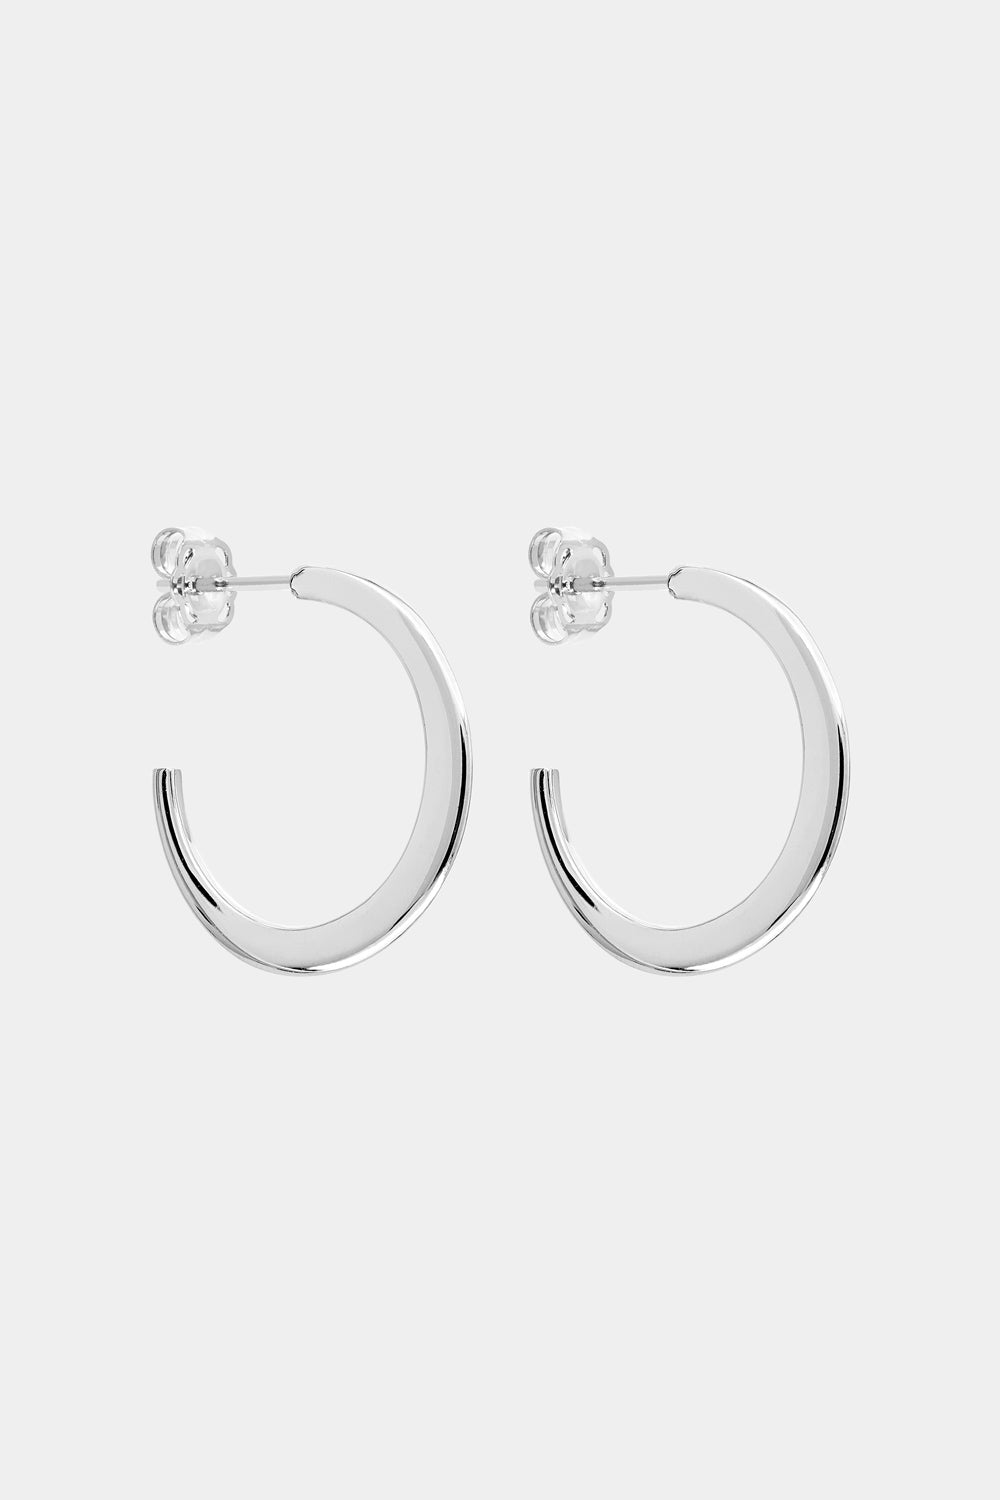 Single Band Hoops | Silver or 9K White Gold, More Options Available| Natasha Schweitzer